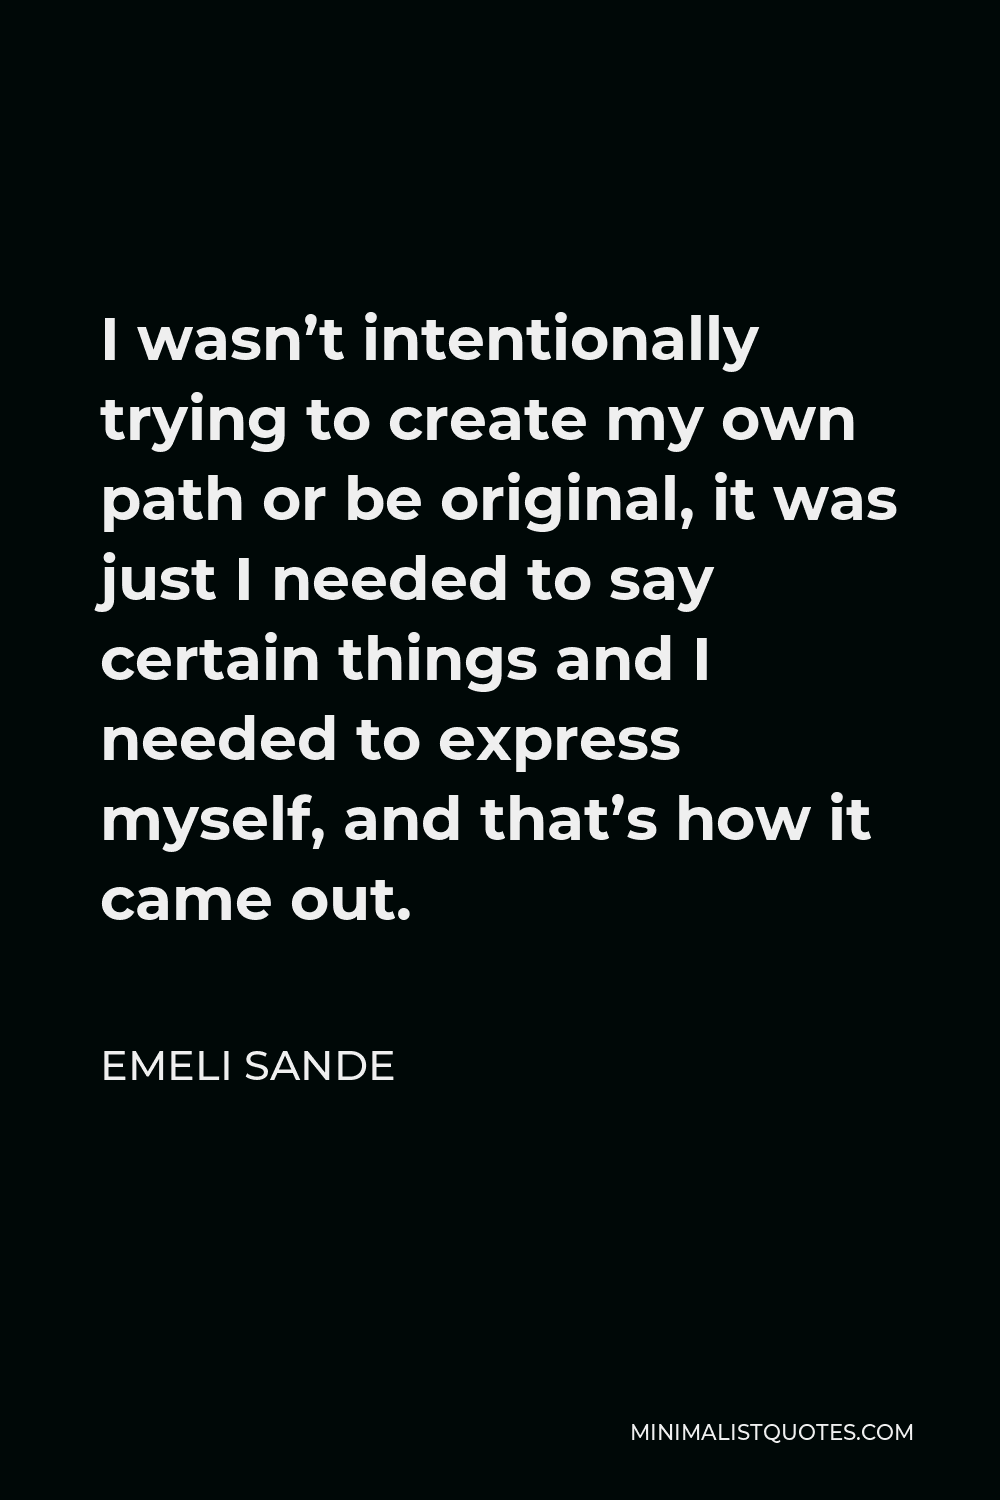 Emeli Sande Quote - I wasn’t intentionally trying to create my own path or be original, it was just I needed to say certain things and I needed to express myself, and that’s how it came out.